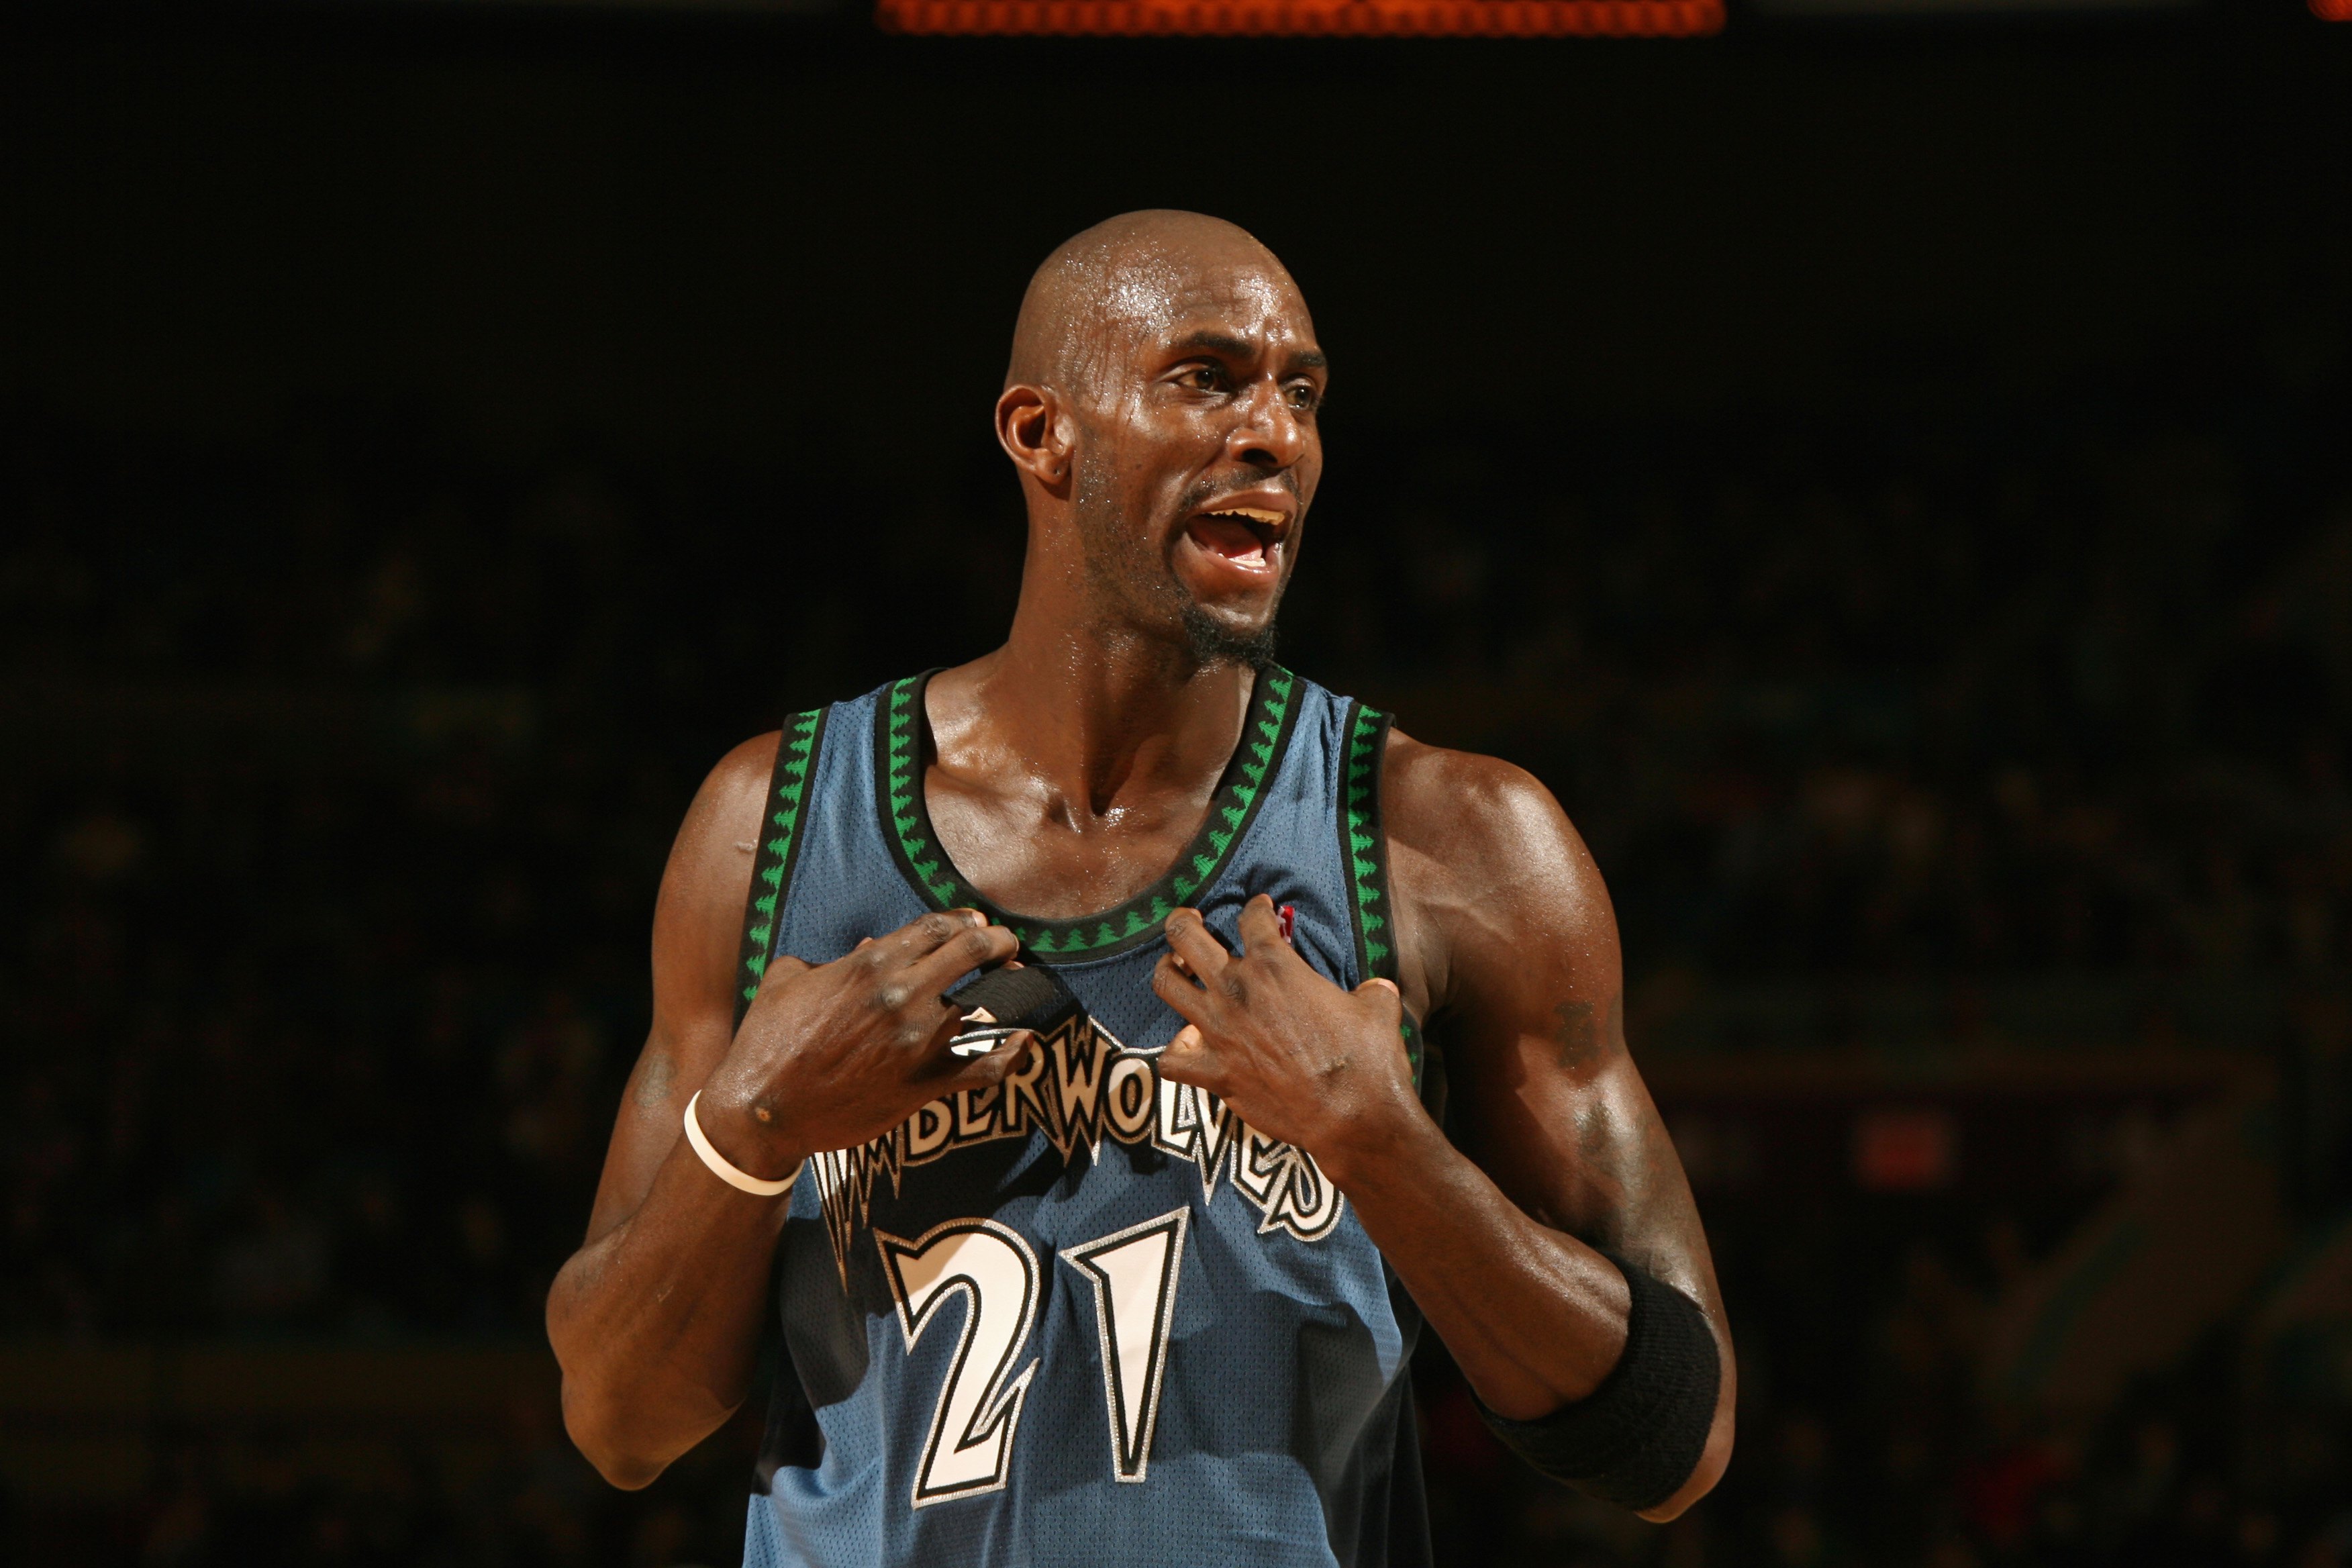 Kevin Garnett's Return to Minnesota Timberwolves Is More Than Just a Good Story ...